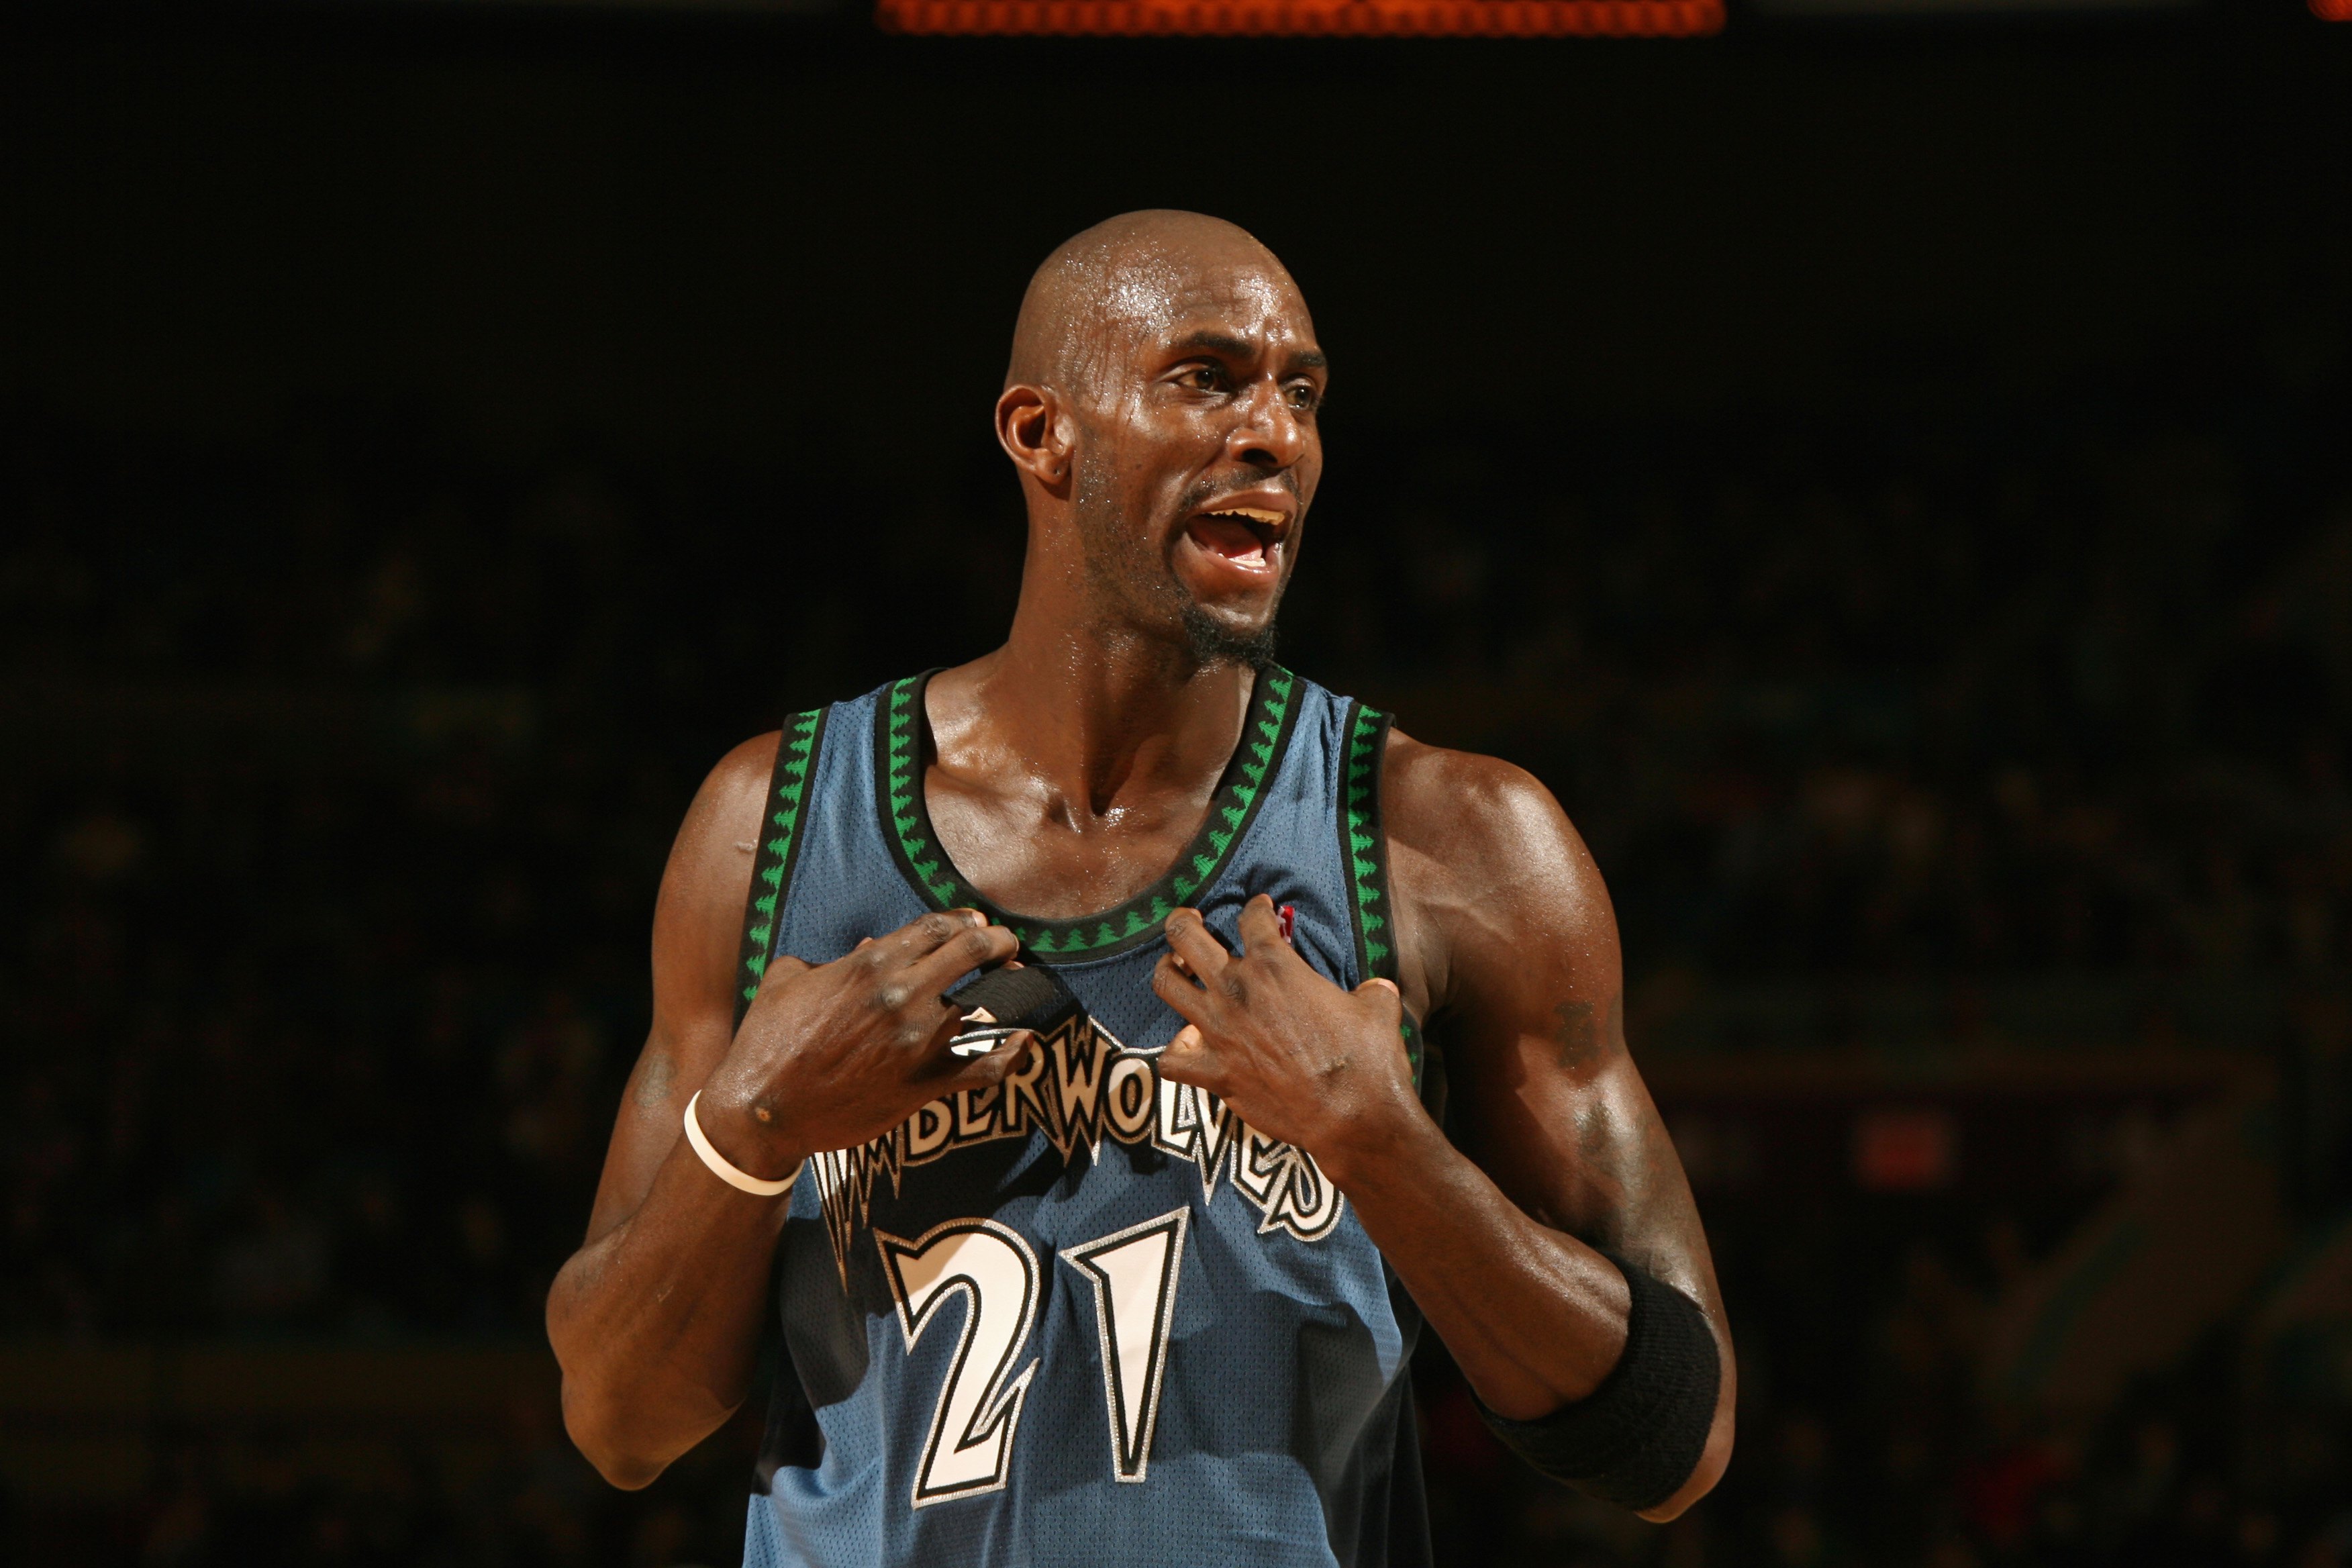 Kevin Garnett's Return to Minnesota Timberwolves Is More Than Just a Good Story ...